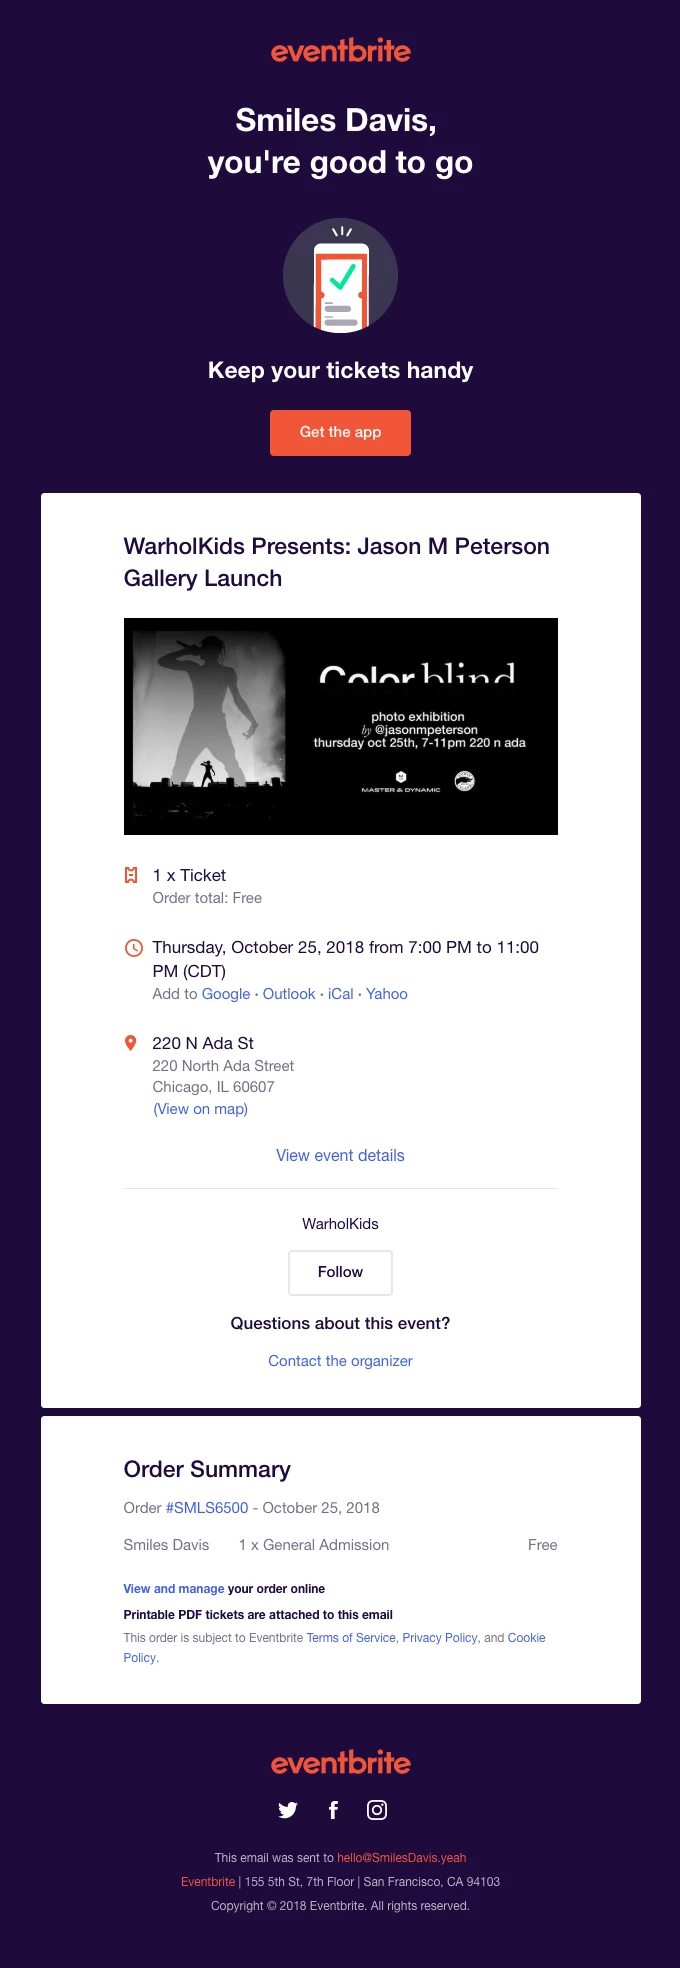 Eventbrite event confirmation email courtesy of Really Good Emails.